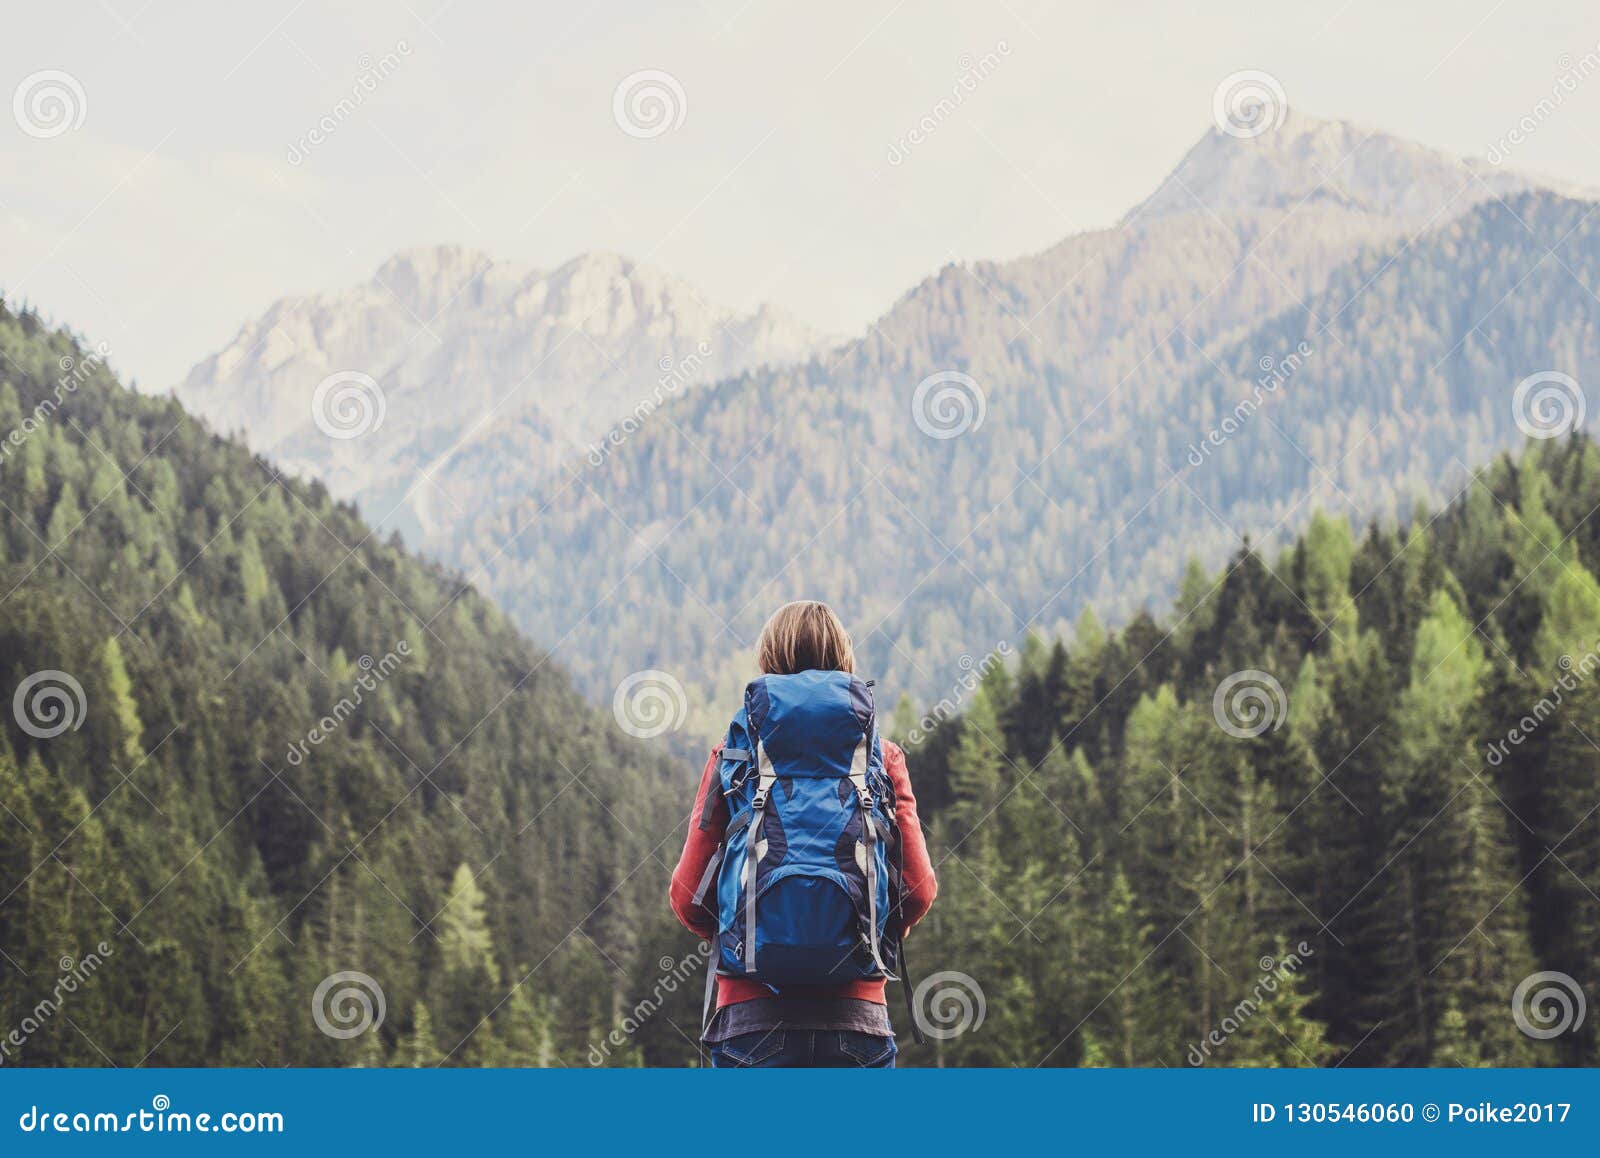 young woman traveler in alps mountains. travel and active lifestyle concept